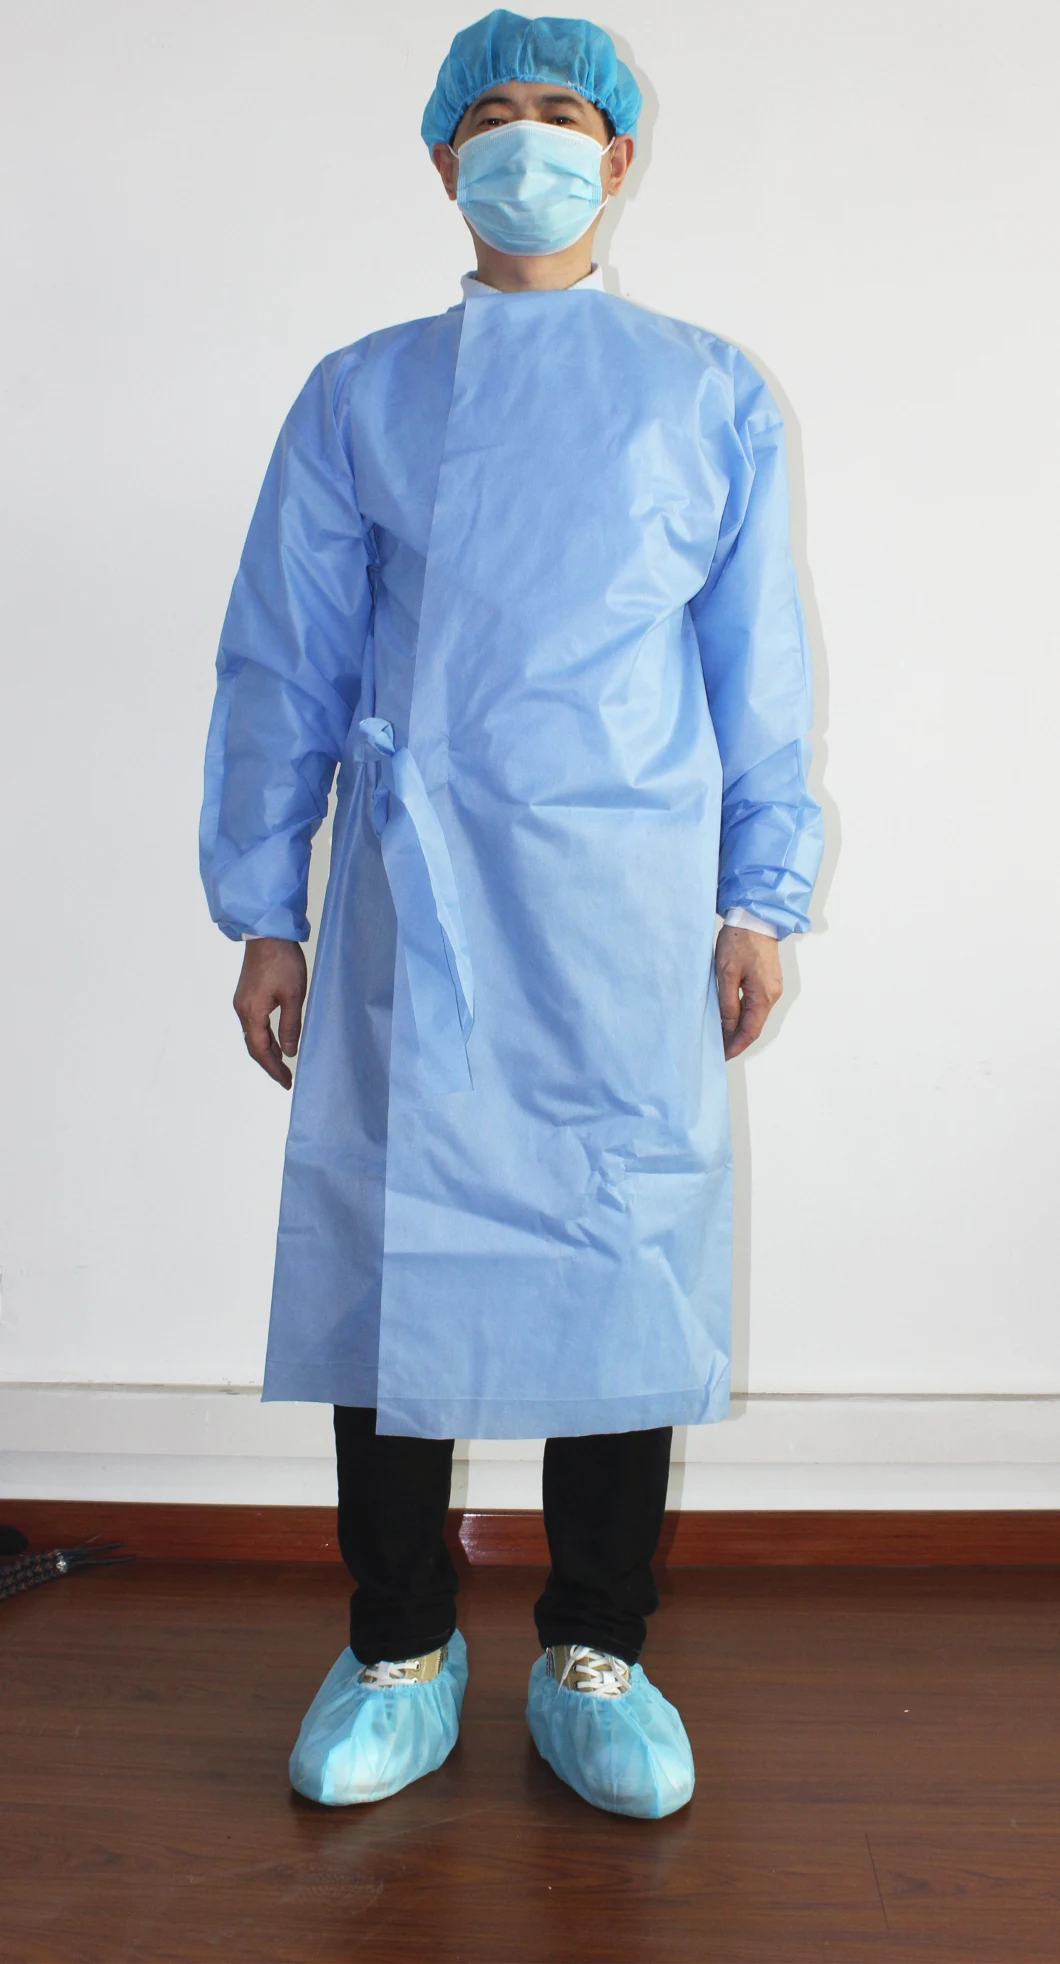 35g SMS Protective Suit / Protective Gowns / Disposable Protective Wear /Disposable Face Mask